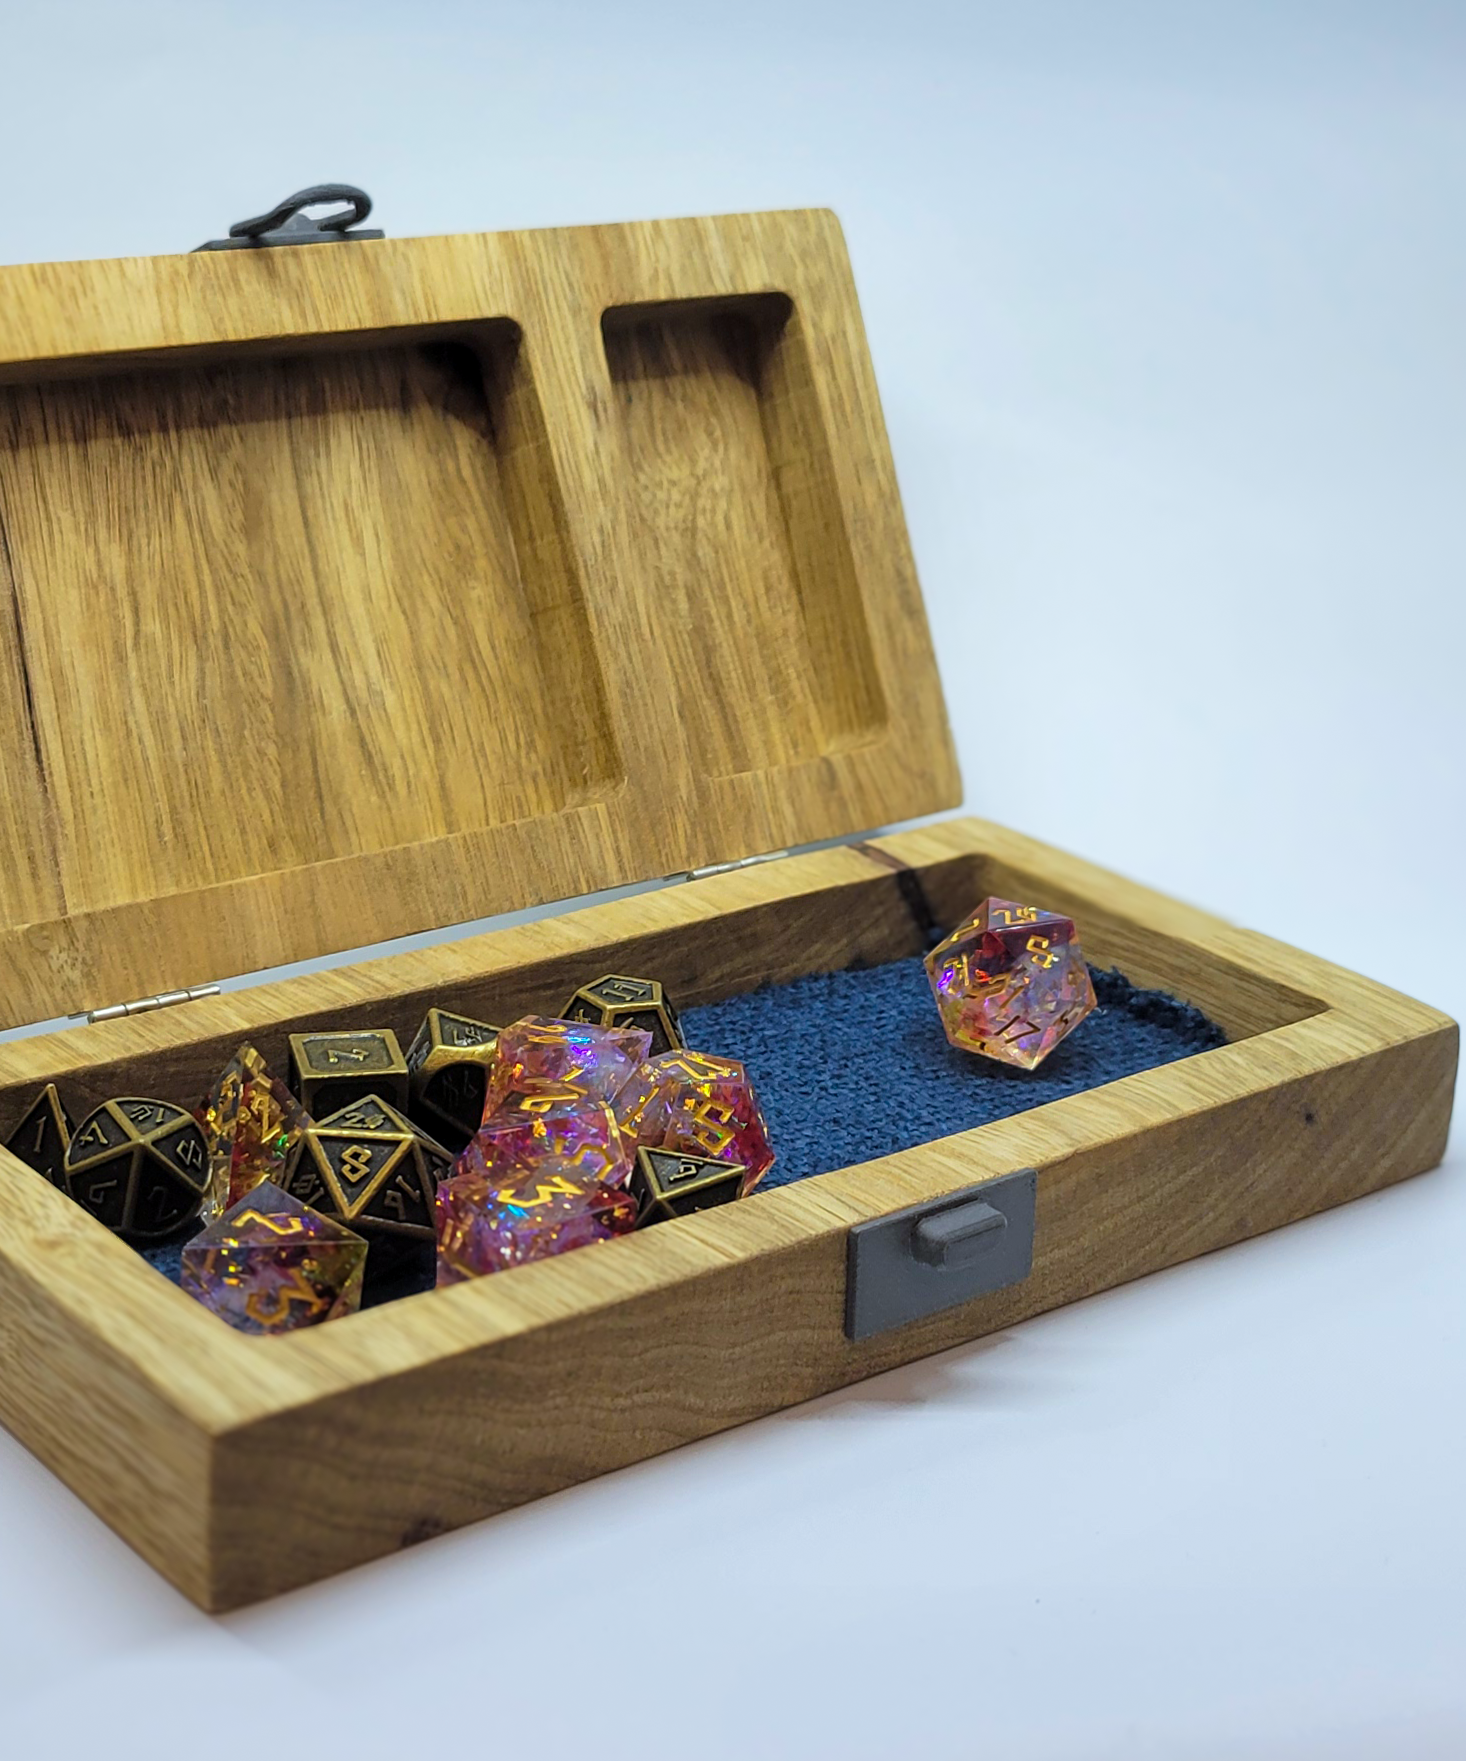 Wooden box project example